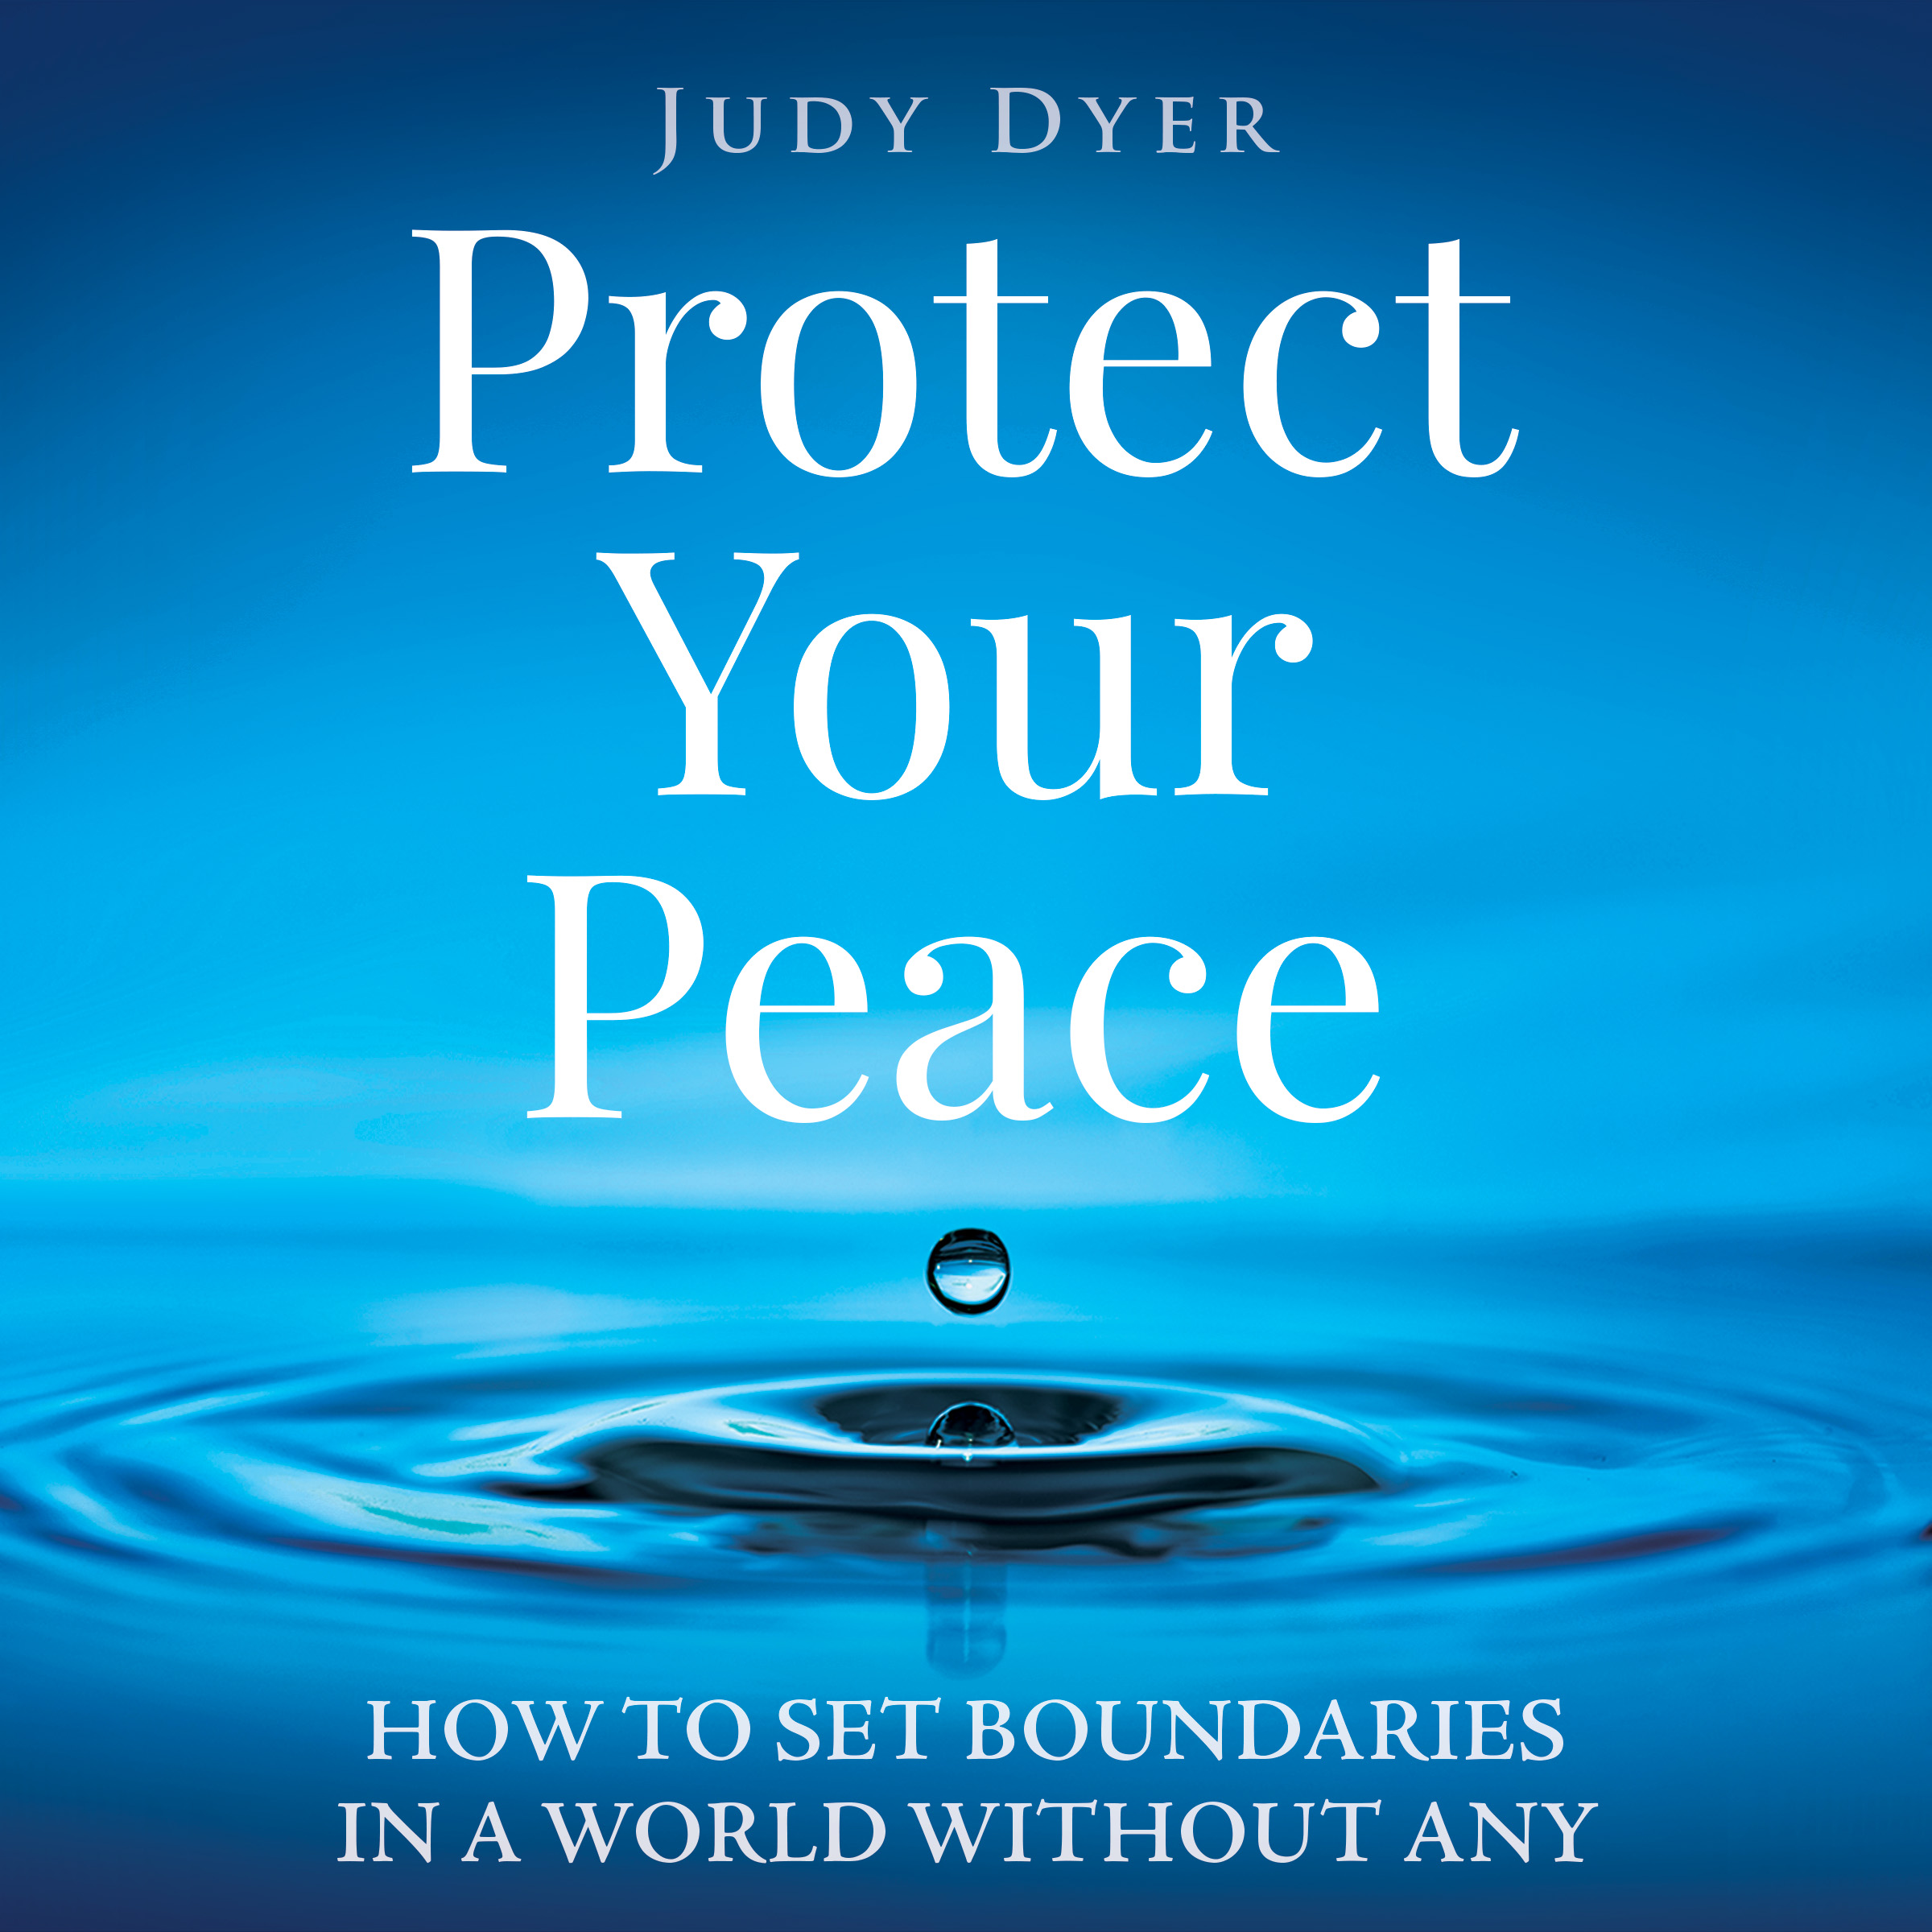 Protect Your Peace by Judy Dyer